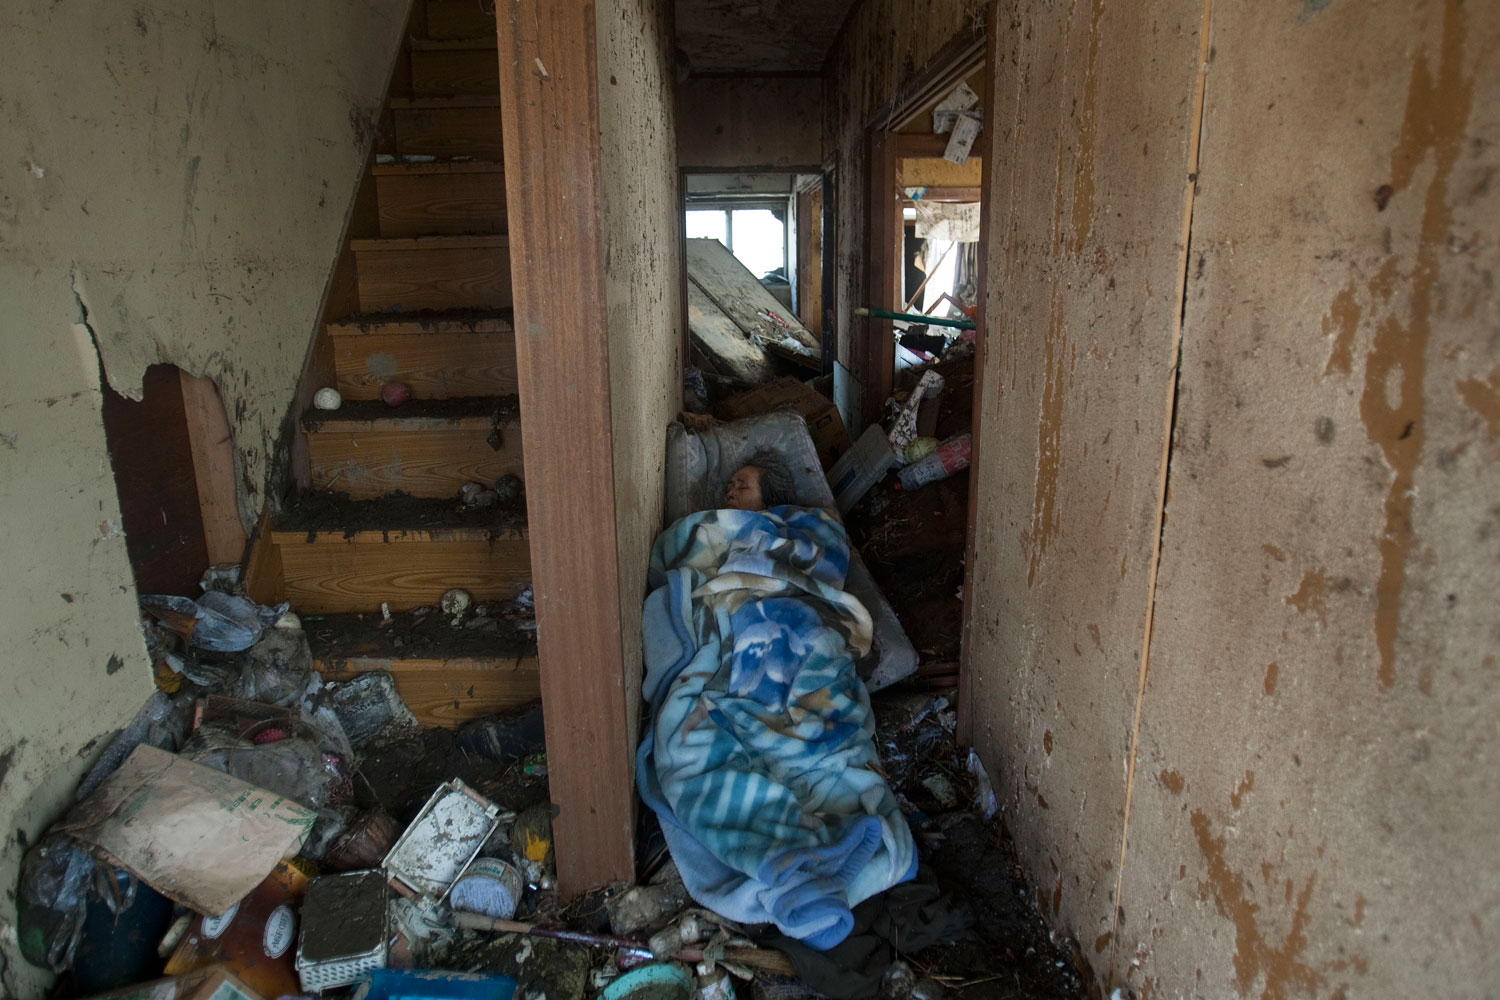 The body of an elderly woman lies next to the stairs in her home in Sendai, Miyagi prefecture, northeastern Japan, on March 13, 2011, two days after the earthquake and tsunami struck the country.